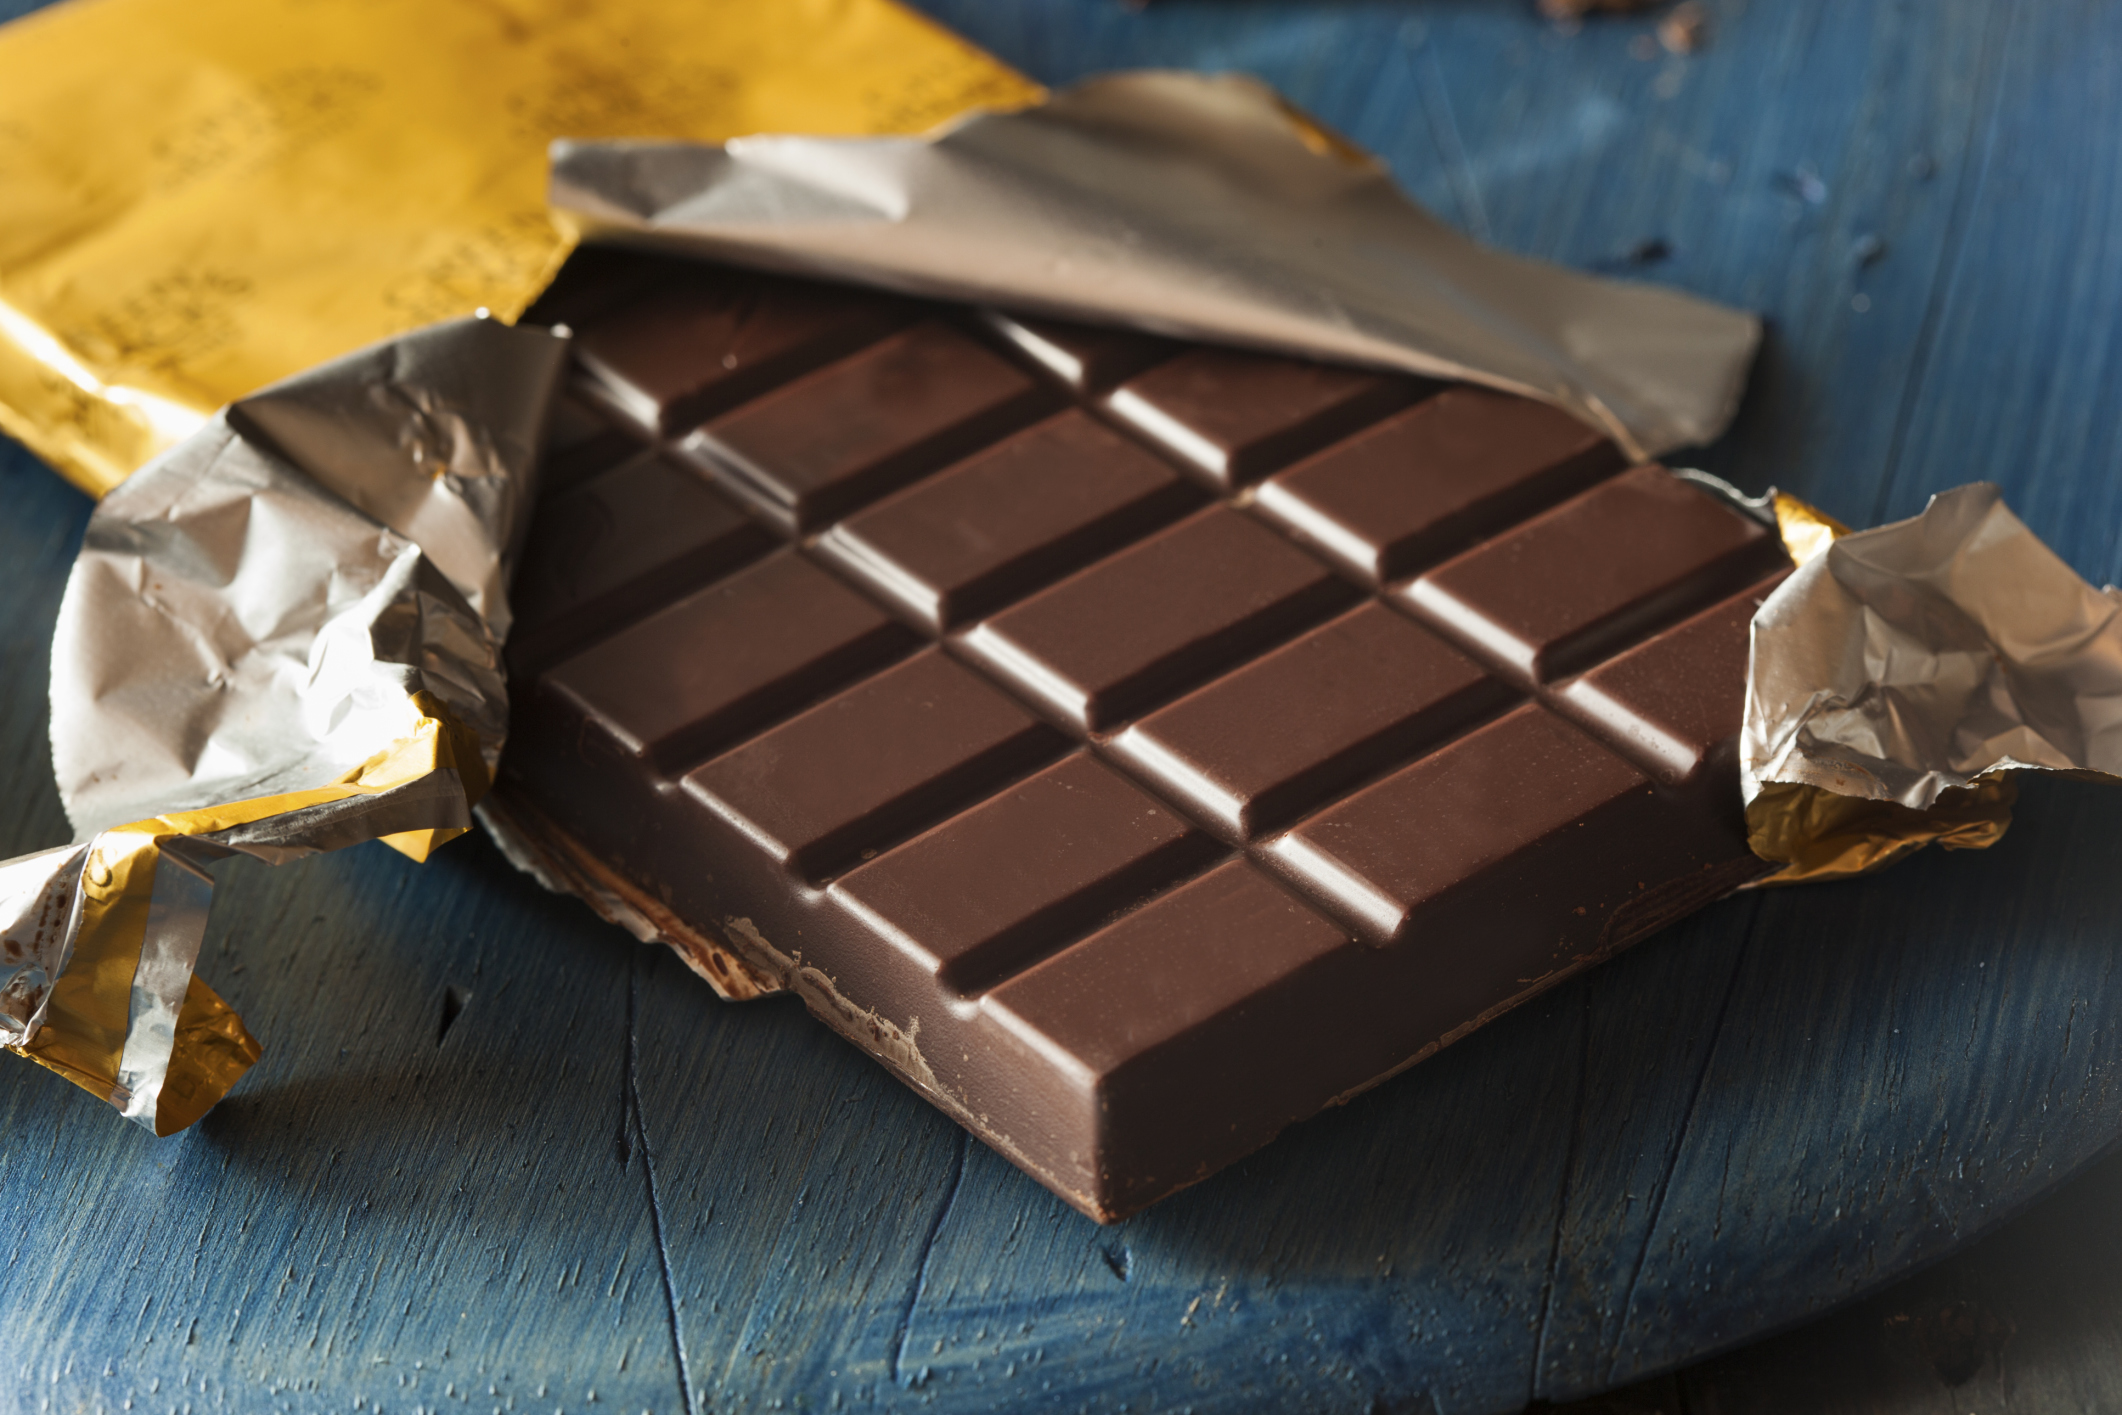 Say “Yuck” Or “Yum” to These Foods and We’ll Determine Your Exact Age dark chocolate bar